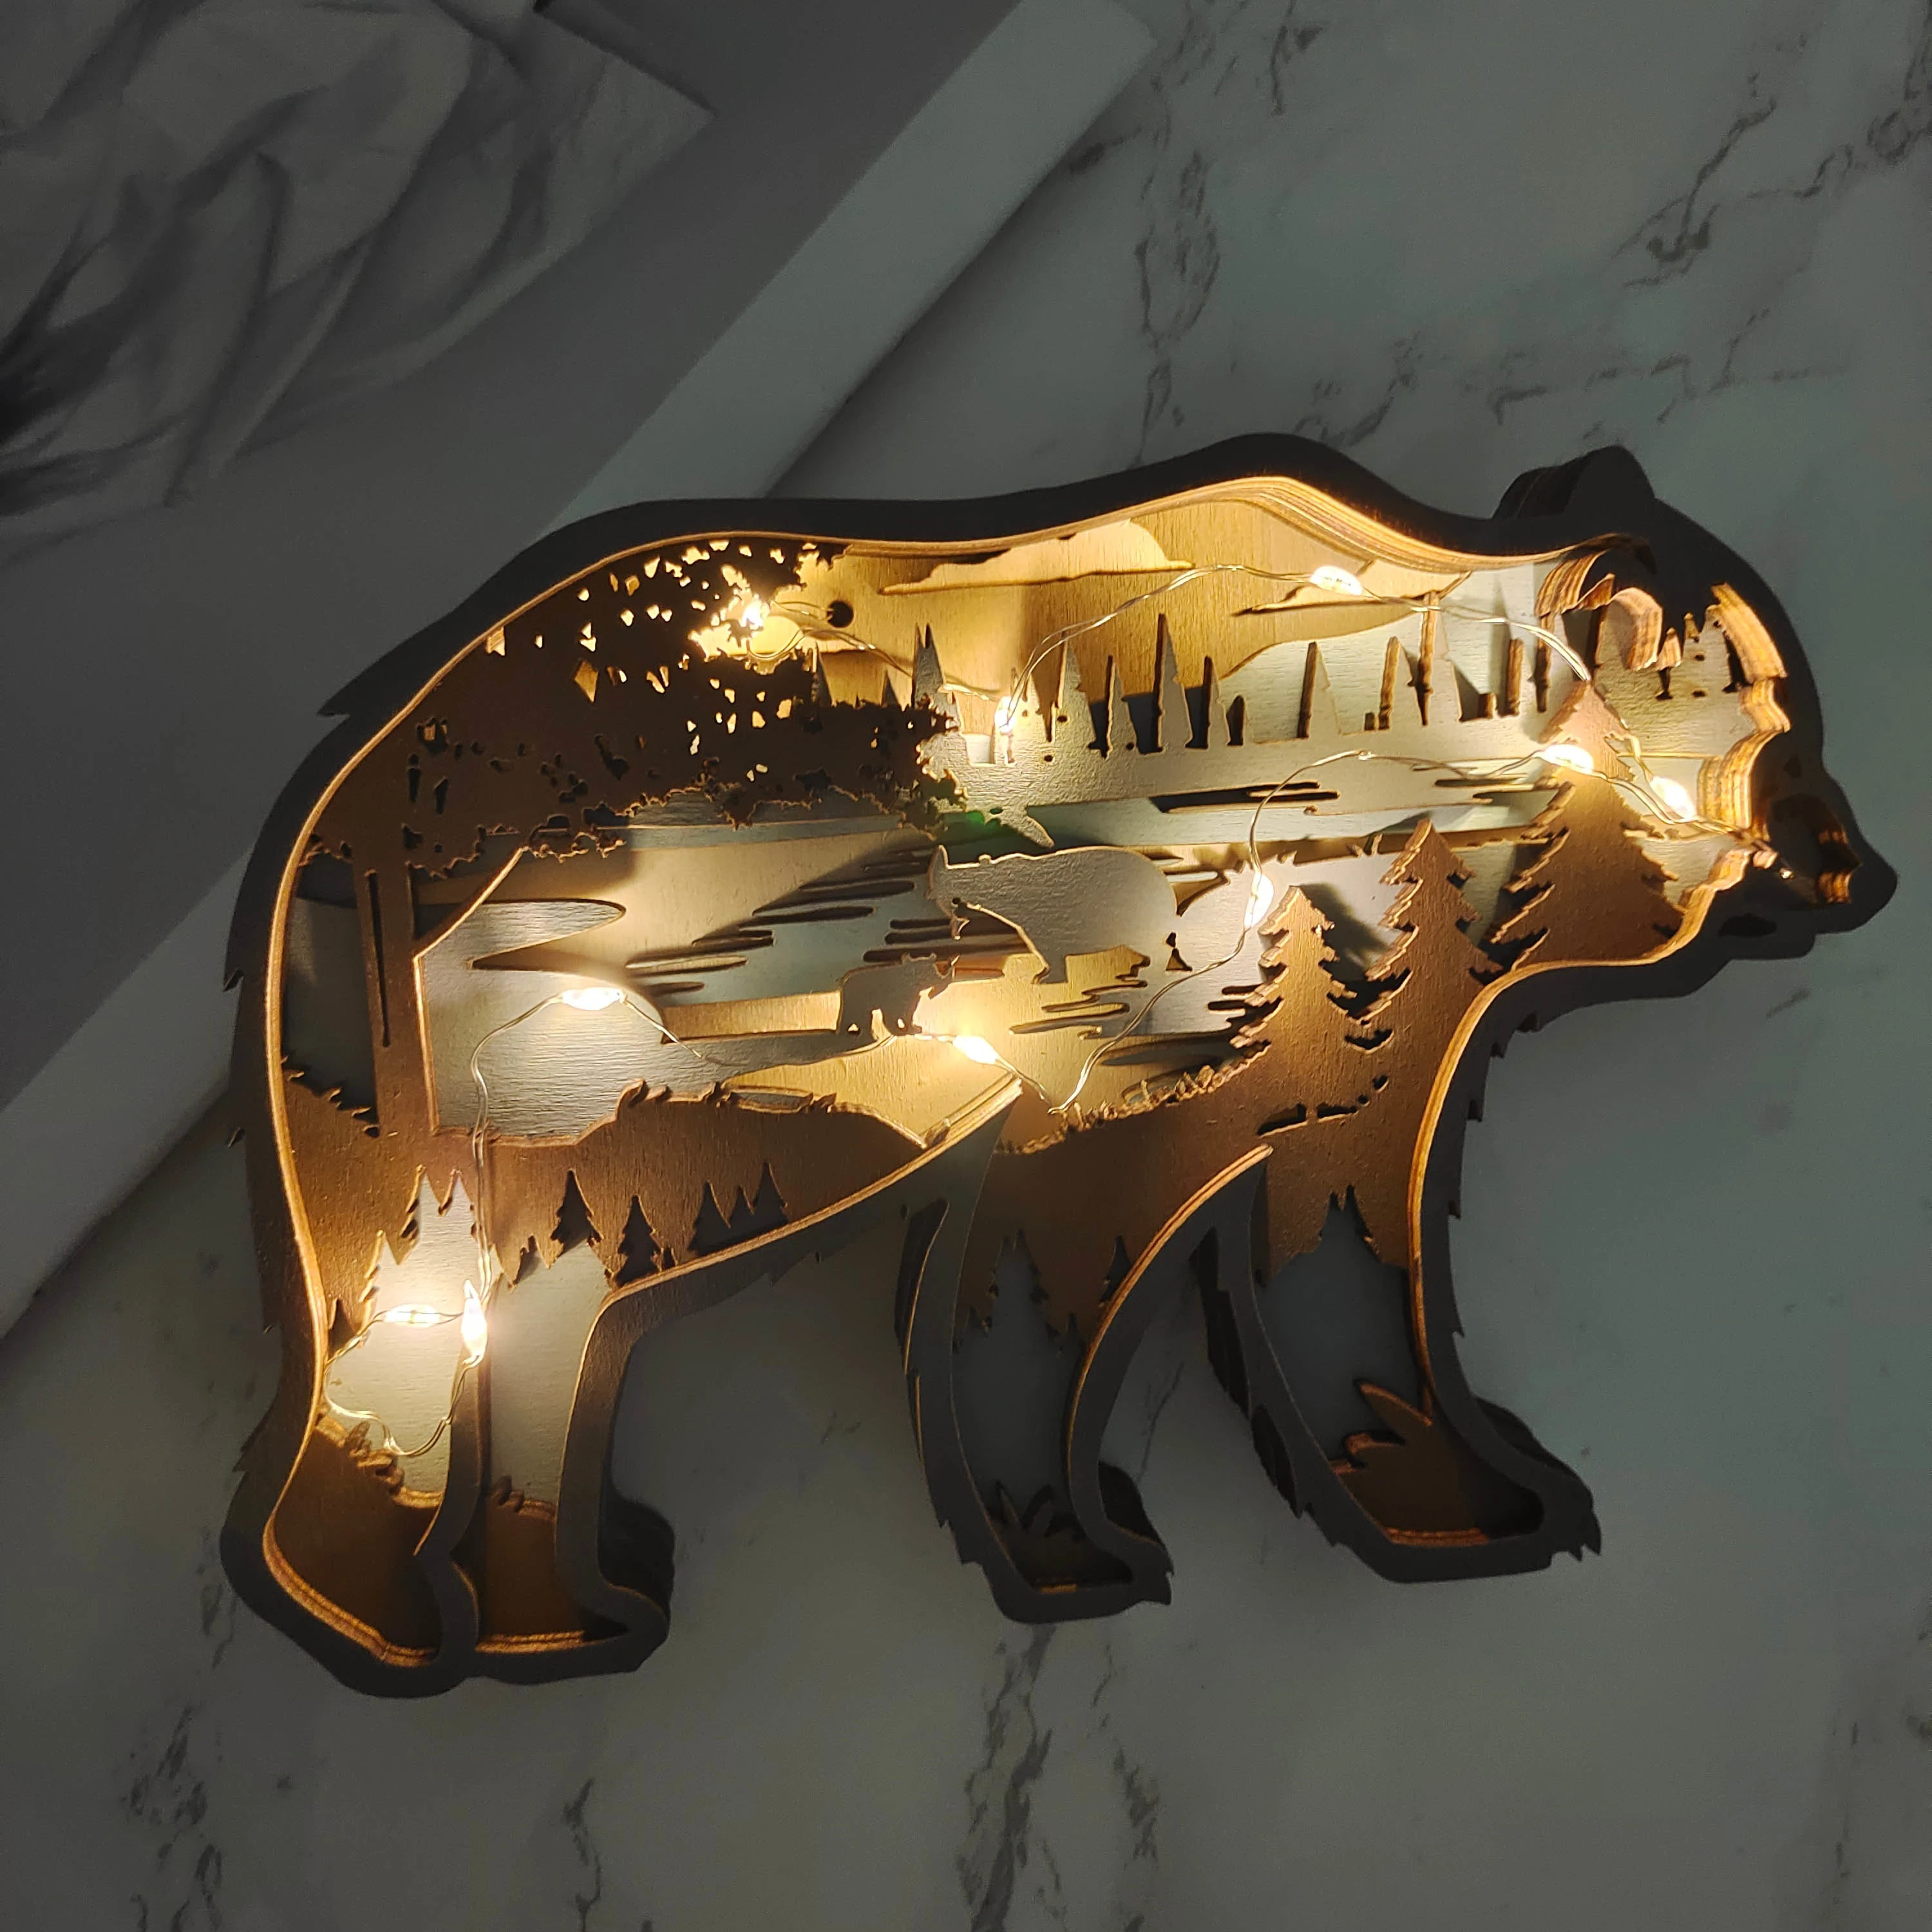 49%OFF🔥Grizzly bears Wooden Carving Light, Suitable For Bedroom, Bedside, Desk, Exquisite Night